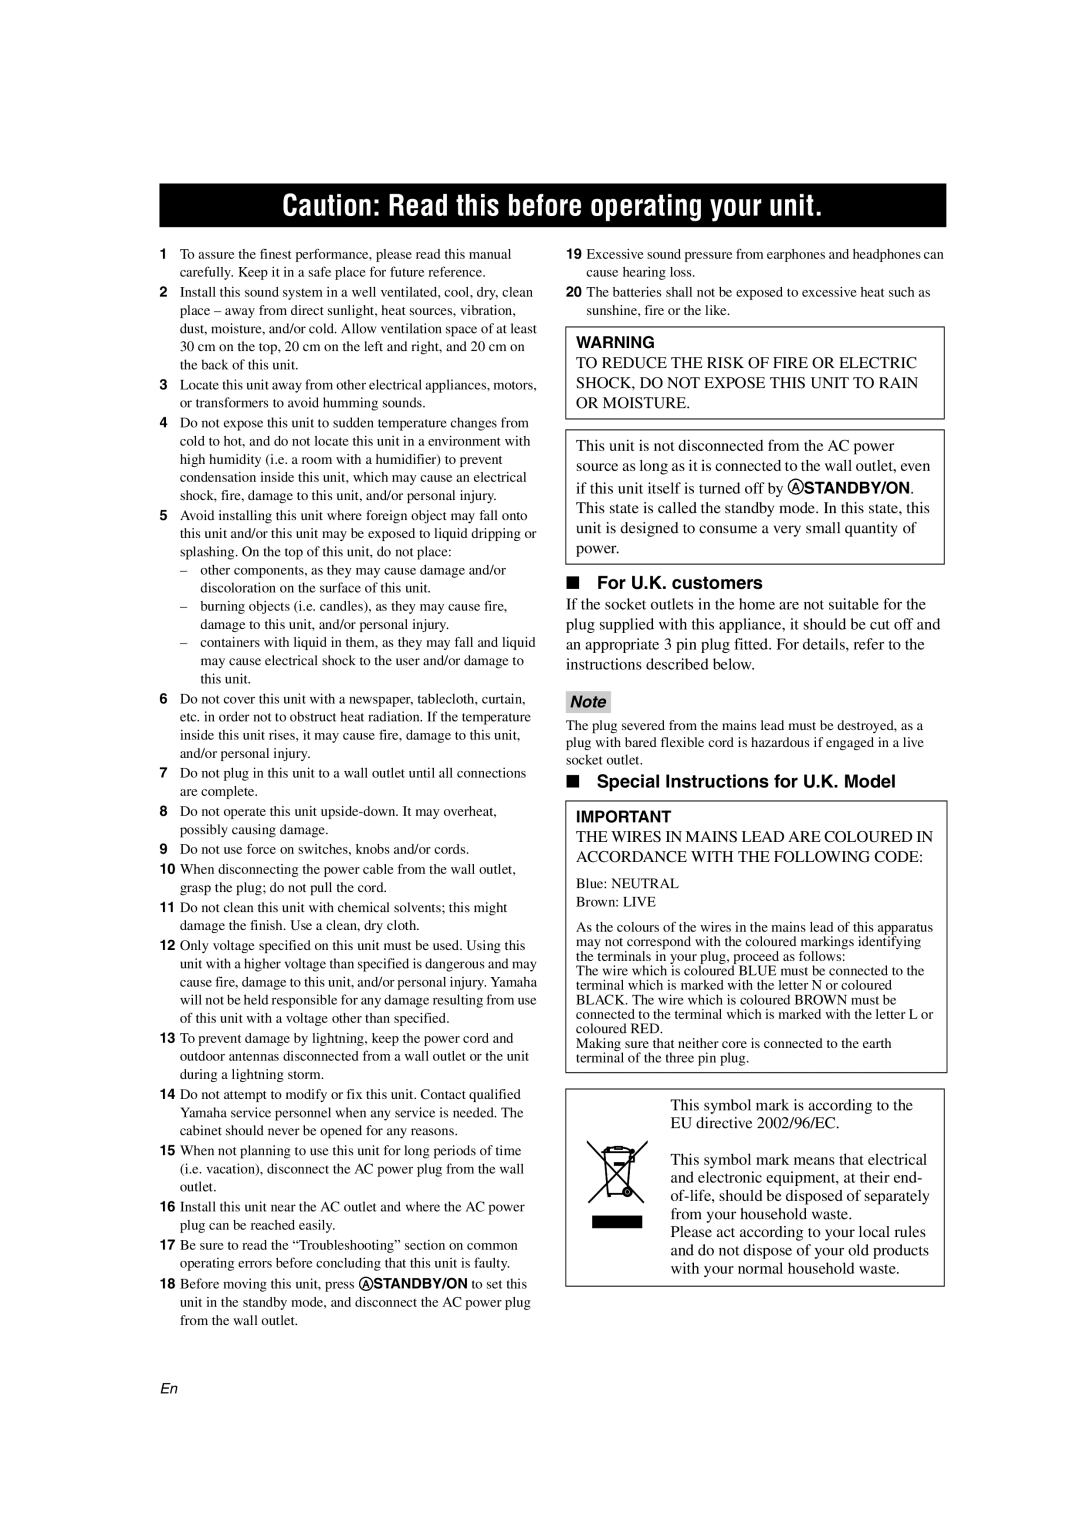 Yamaha DSP-AX463 Caution Read this before operating your unit, For U.K. customers, Special Instructions for U.K. Model 